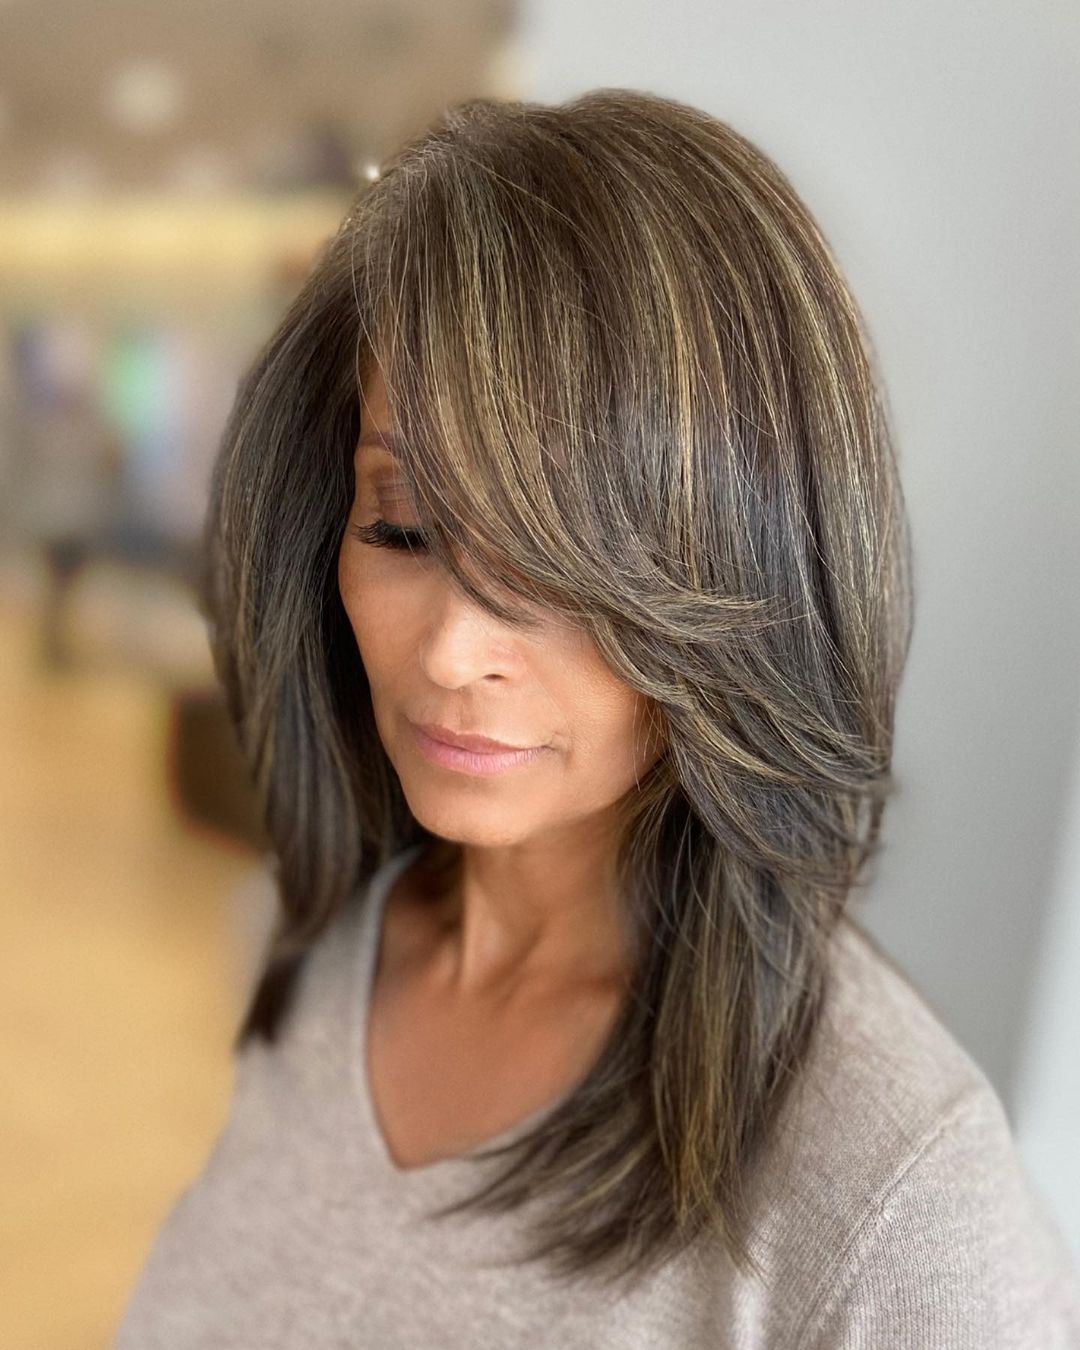 Ash Brown Hair with Highlights and Long Side-Swept Bangs